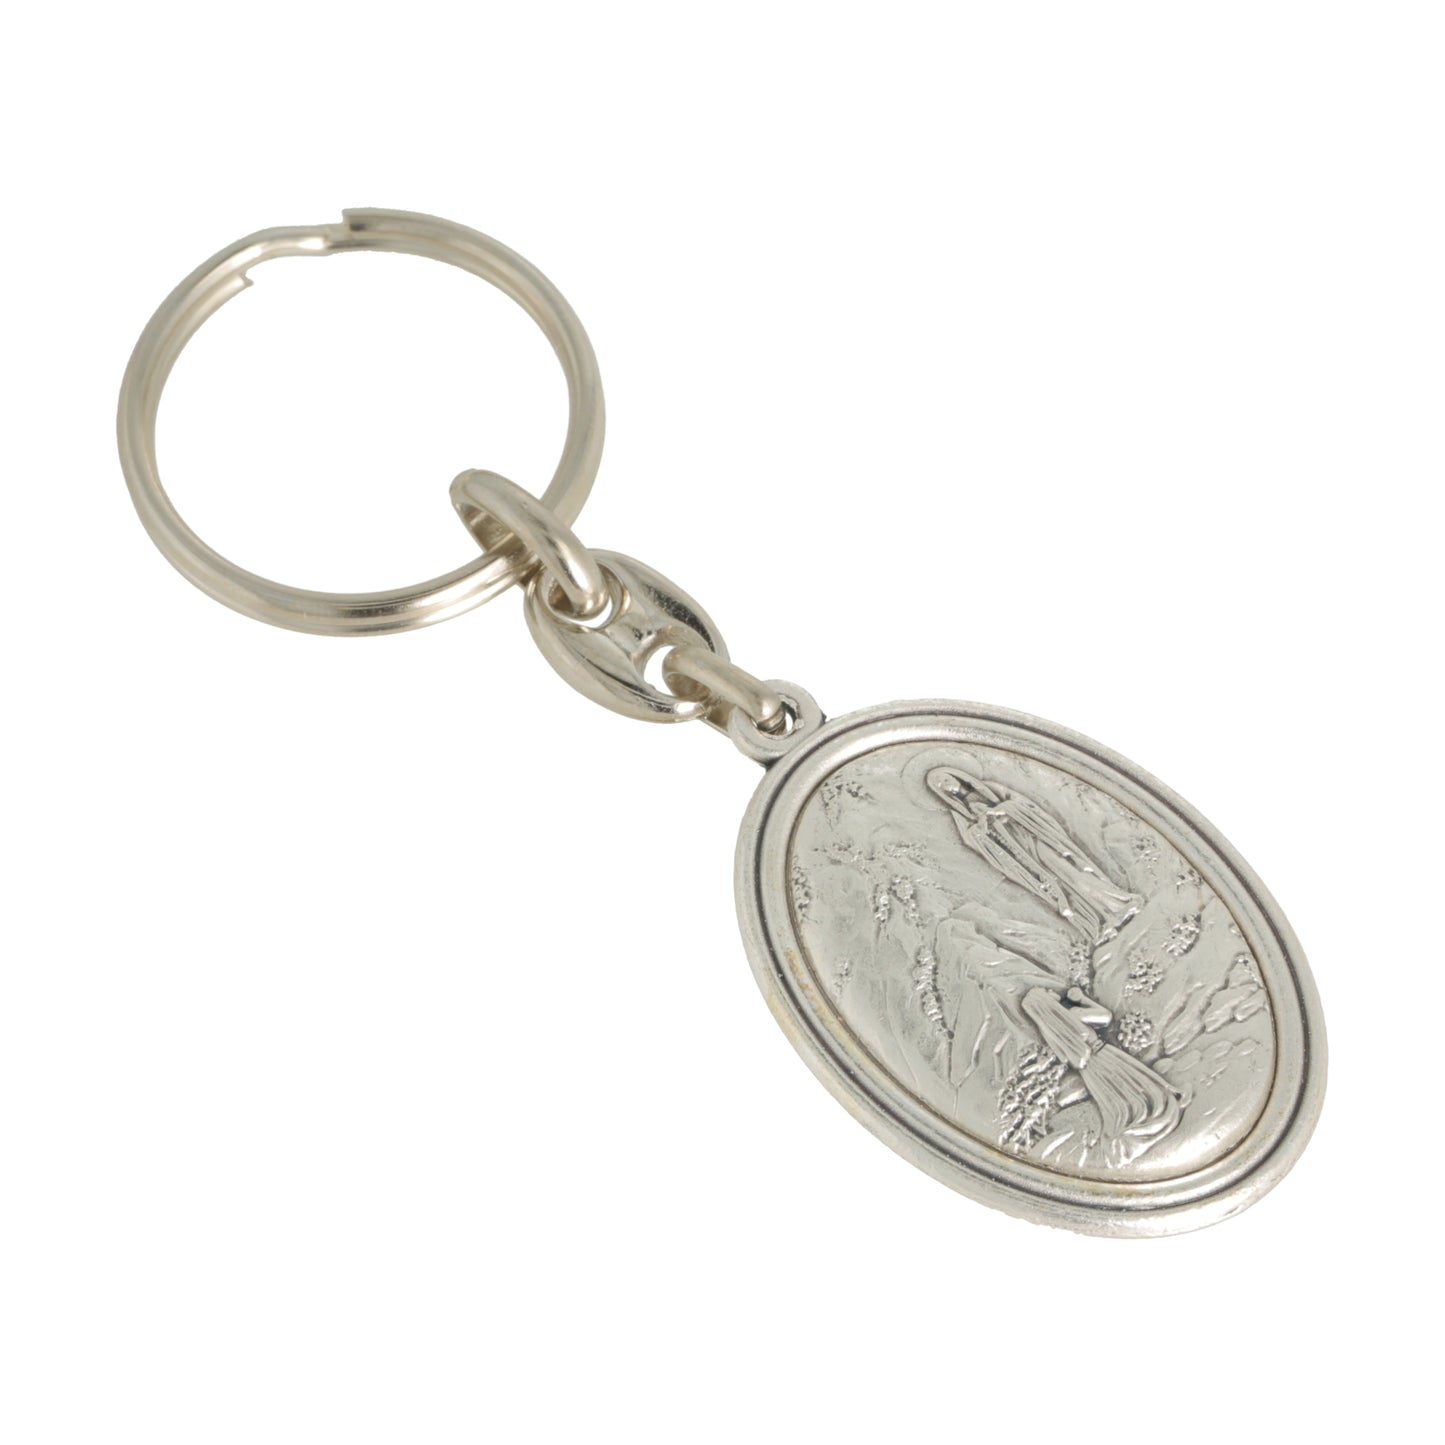 Keychain Virgin of Lourdes Saint Christopher.  Souvenirs from Italy